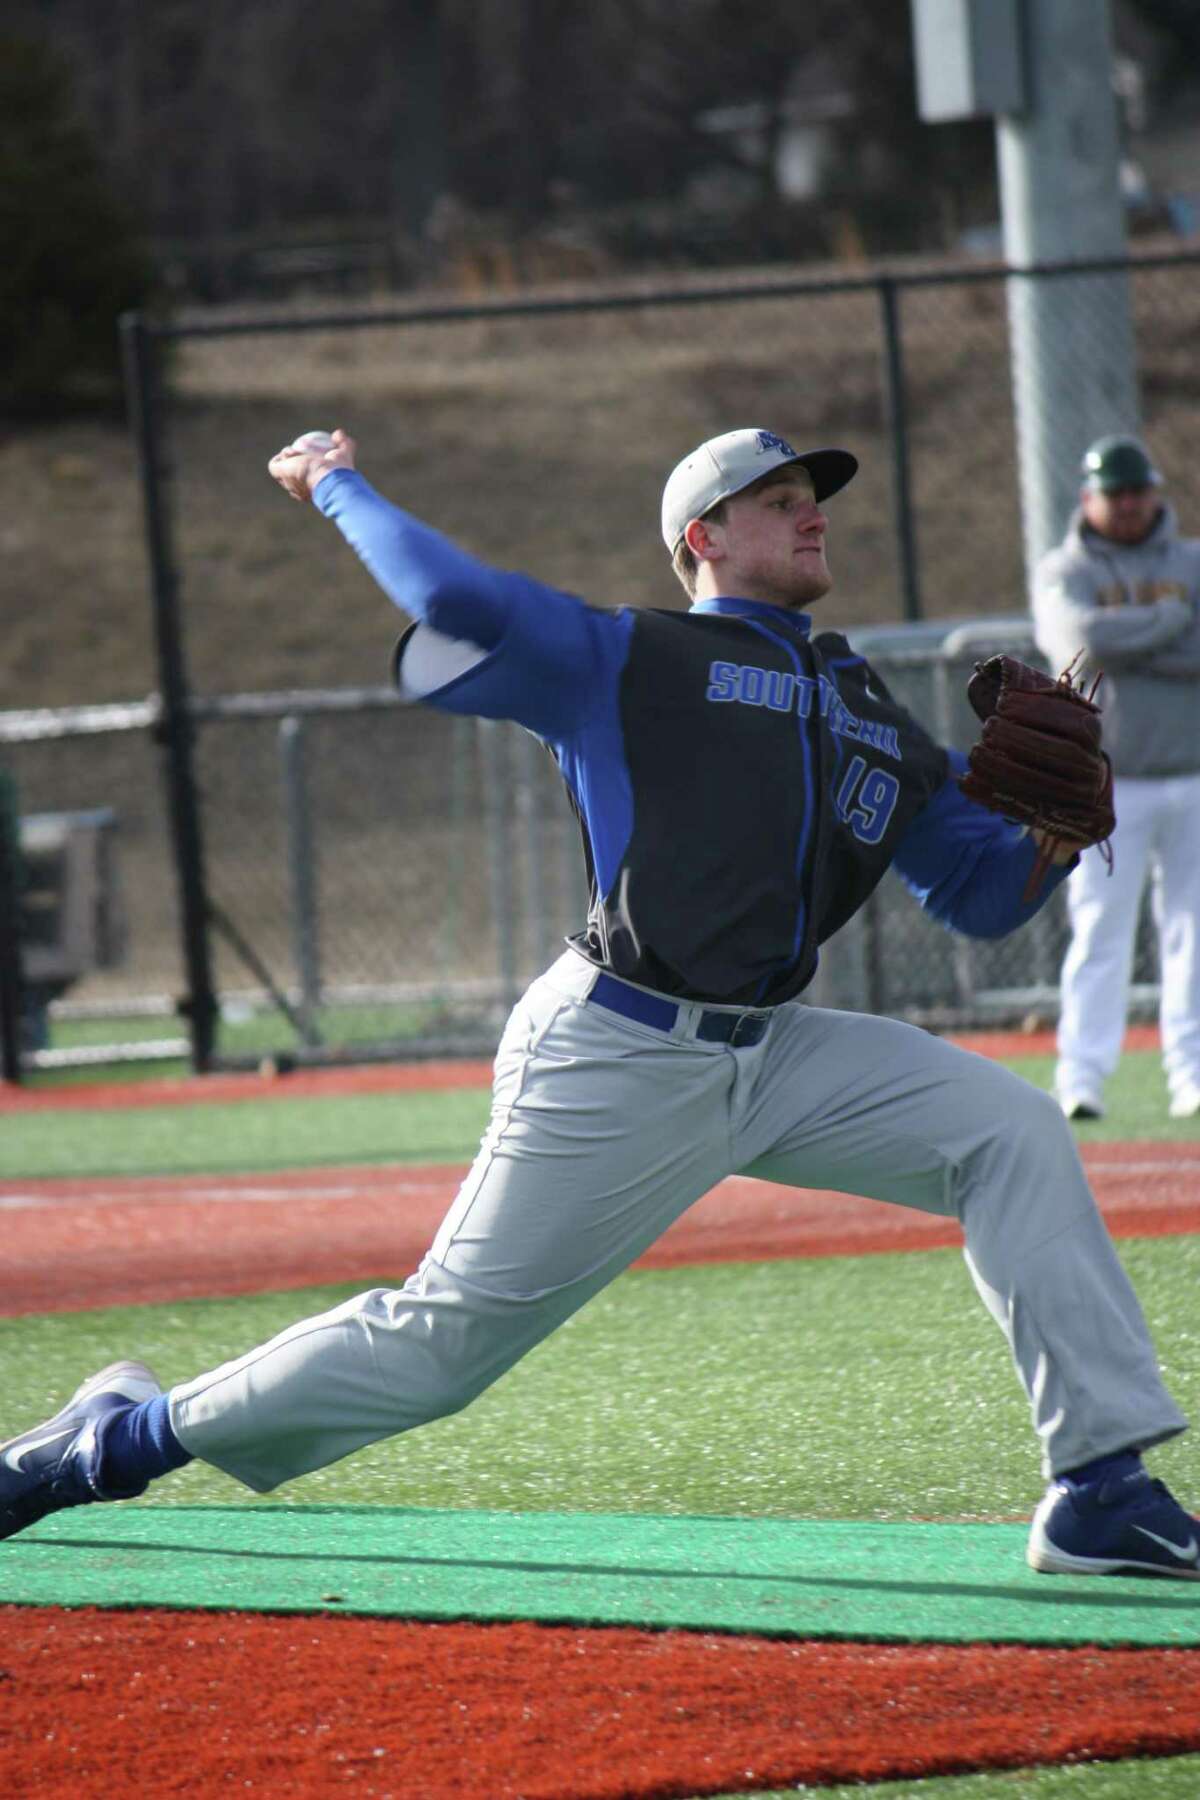 Submitted Photo: Lisa Brochu Former Gilbert High School standout Austin Brochu is a freshman at Southern Connecticut State Universtiy. In his first start for SCSU, Brochu pitched well against LIU Post.